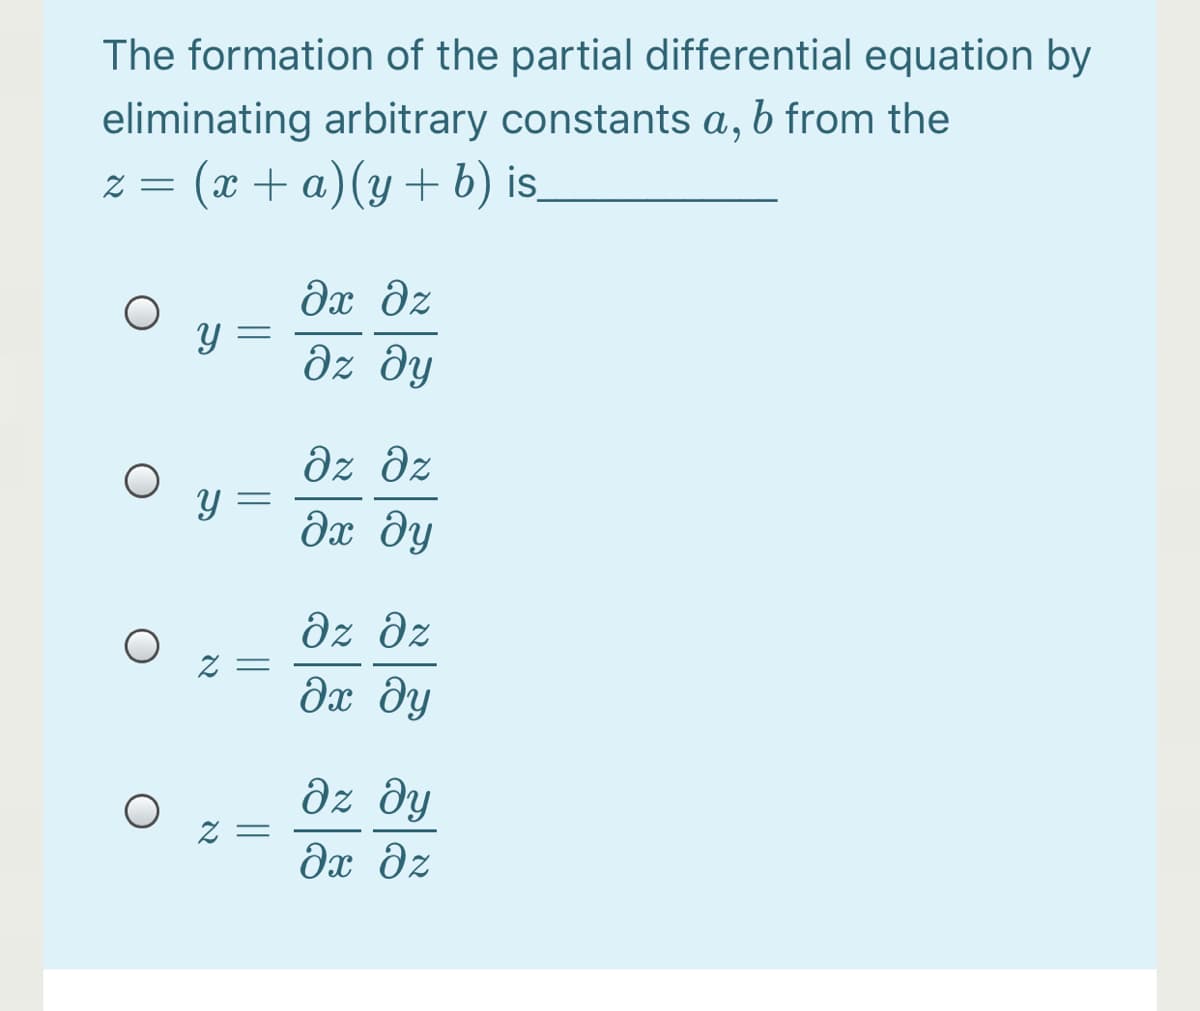 The formation of the partial differential equation by
eliminating arbitrary constants a, b from the
: (x + a)(y+ b) is.
Əx dz
y =
дх ду
dz dz
дх ду
dz əz
дх ду
Z =
дх ду
dx dz
